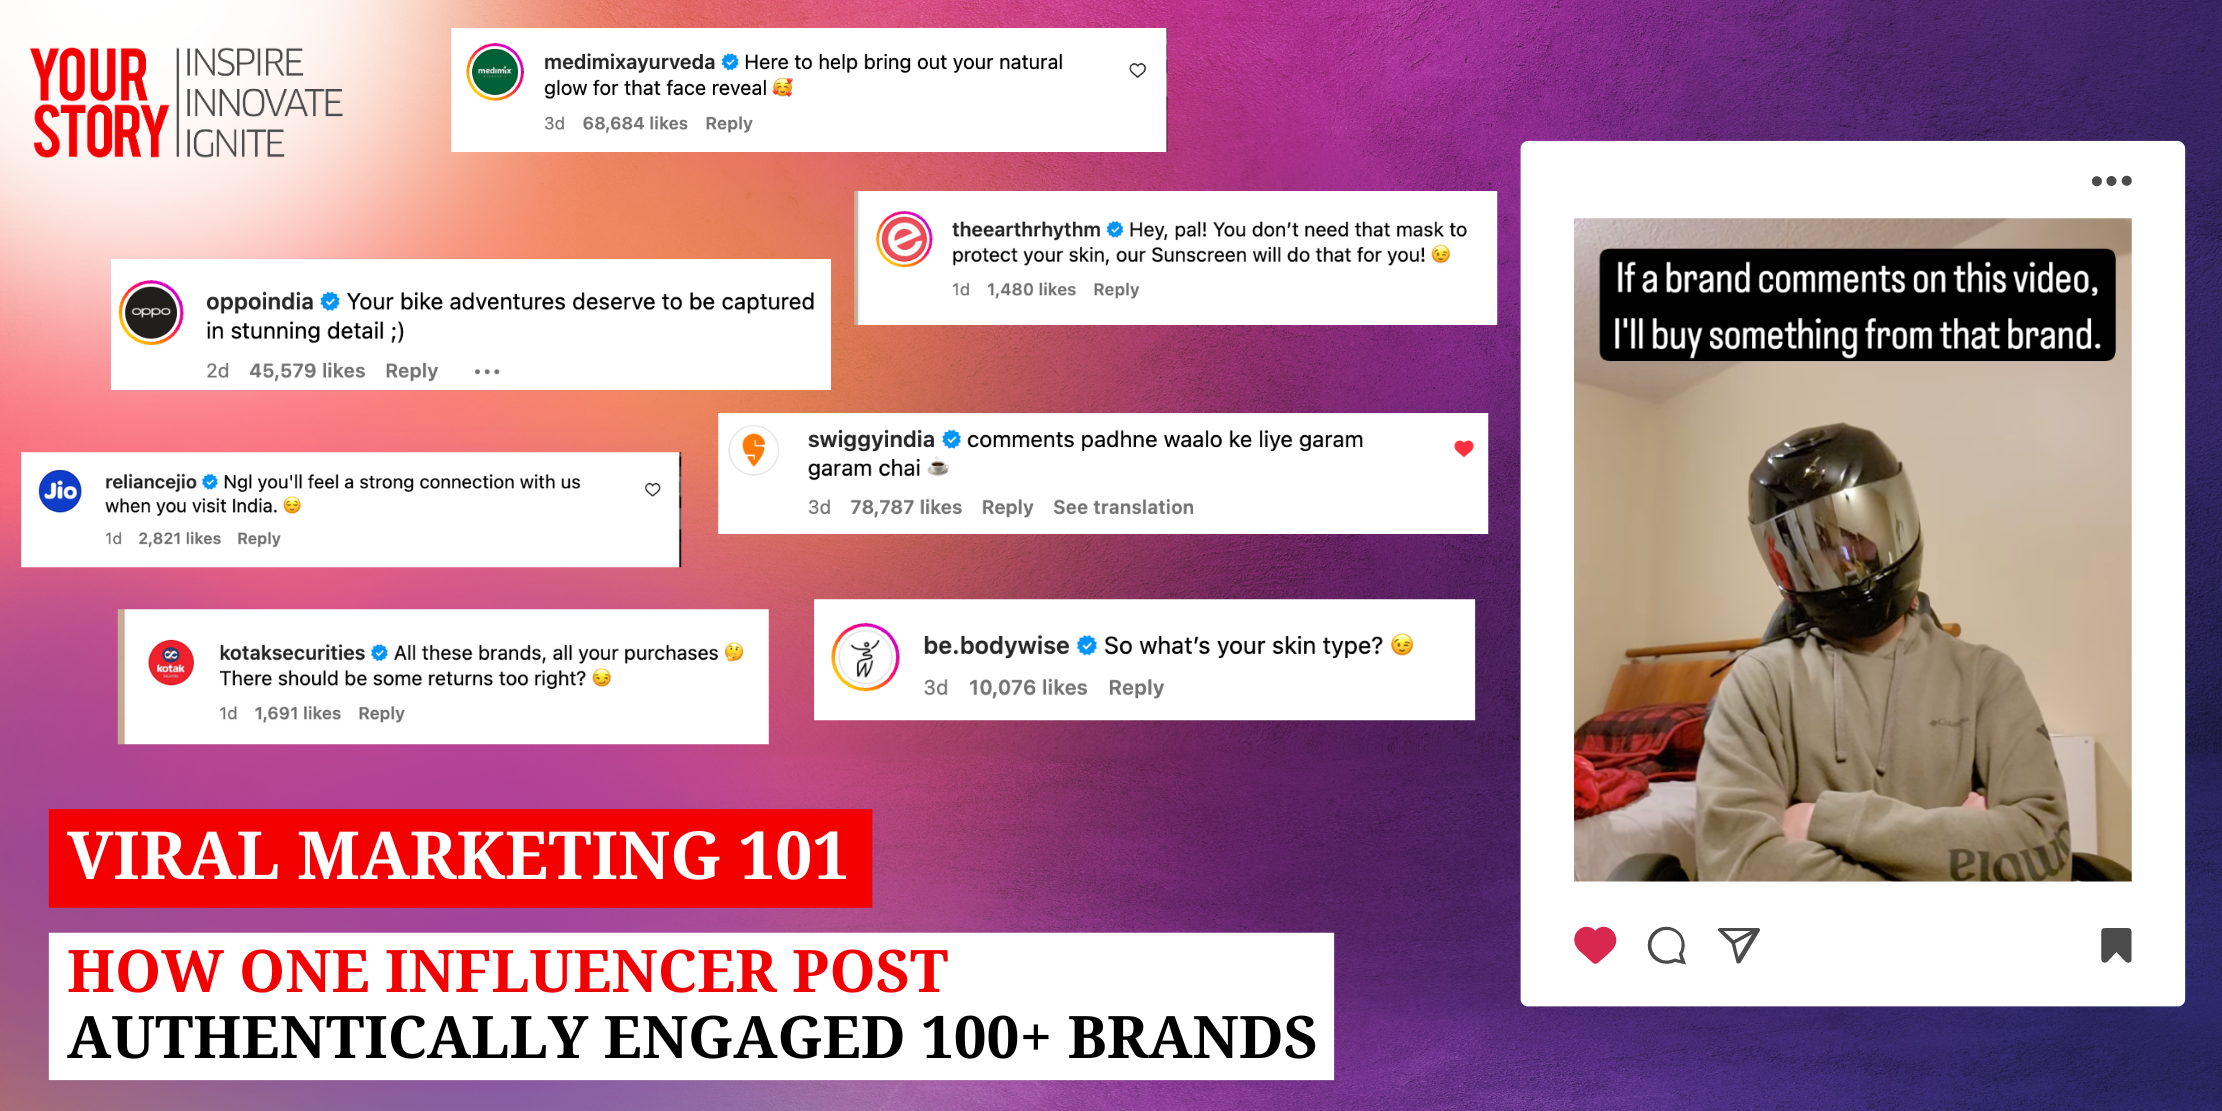 Viral Marketing 101: How One Influencer Post Authentically Engaged 100+ Brands